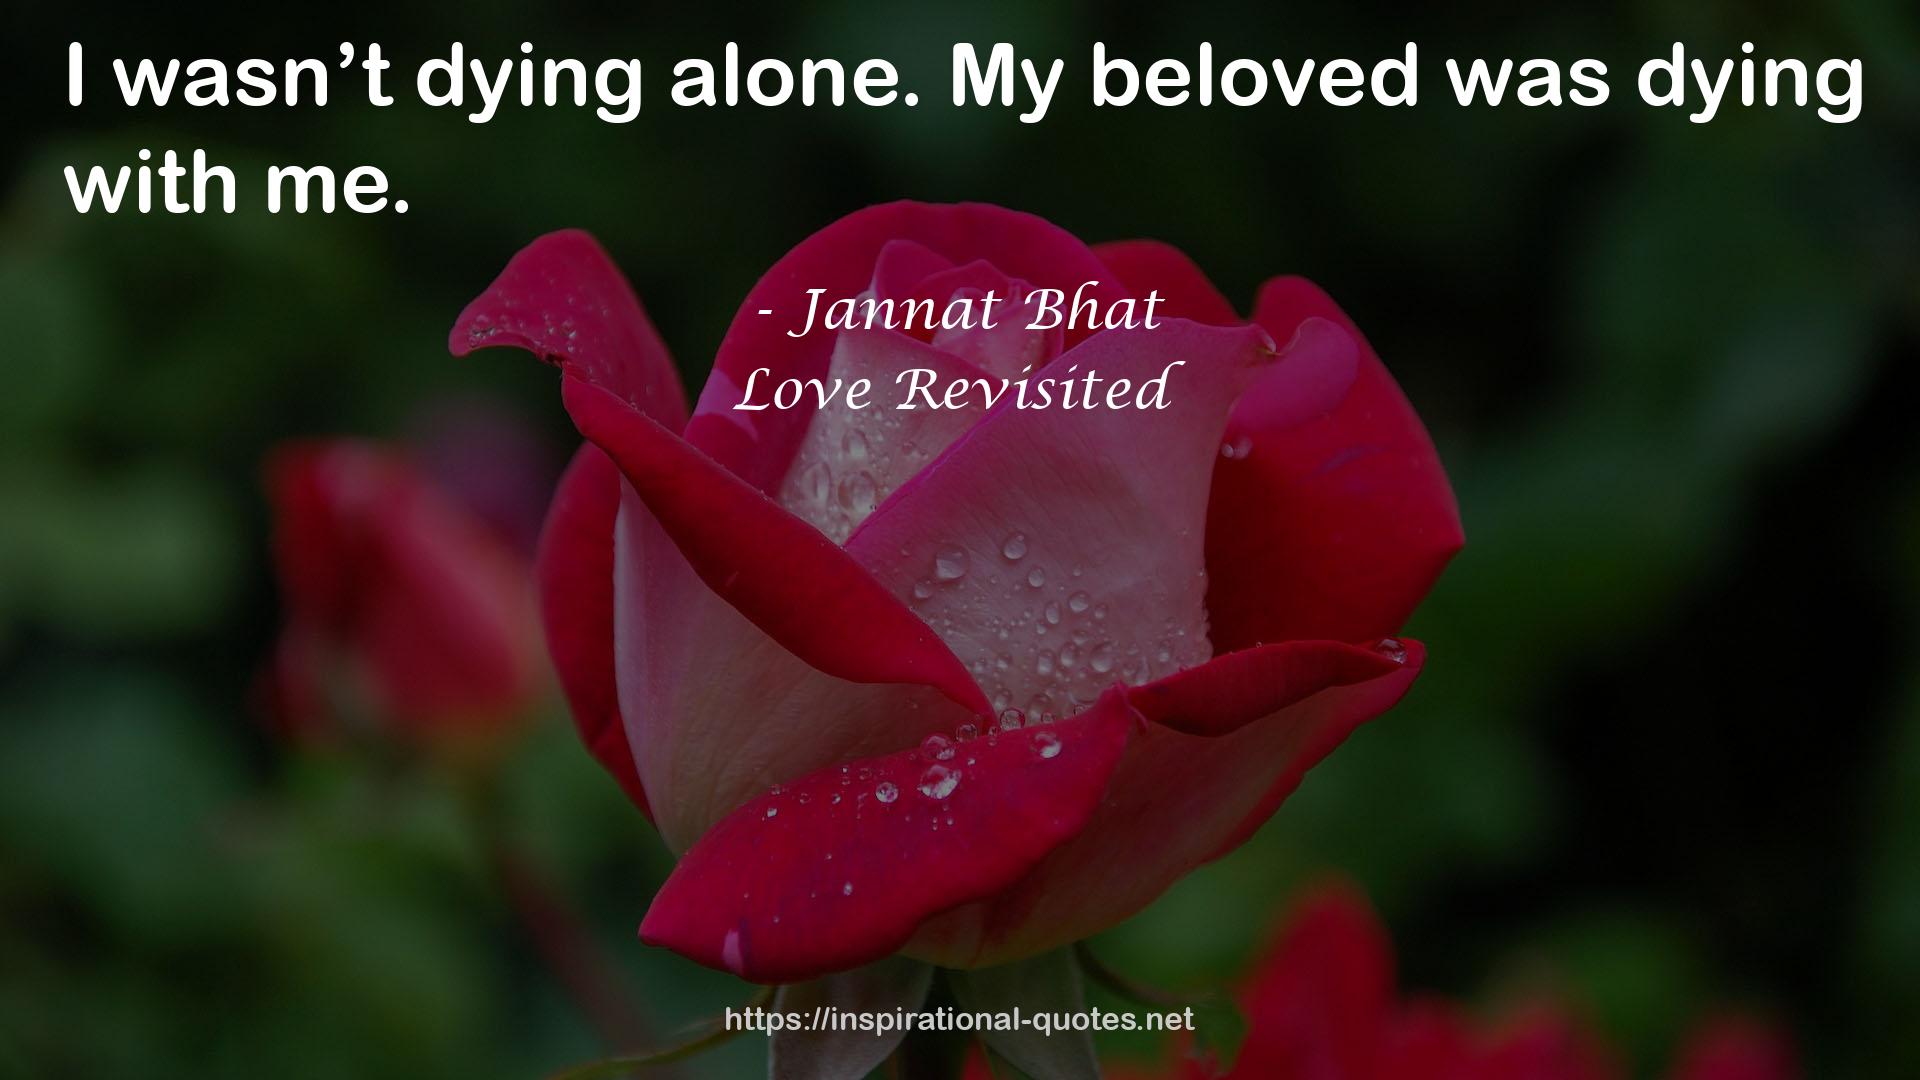 Love Revisited QUOTES